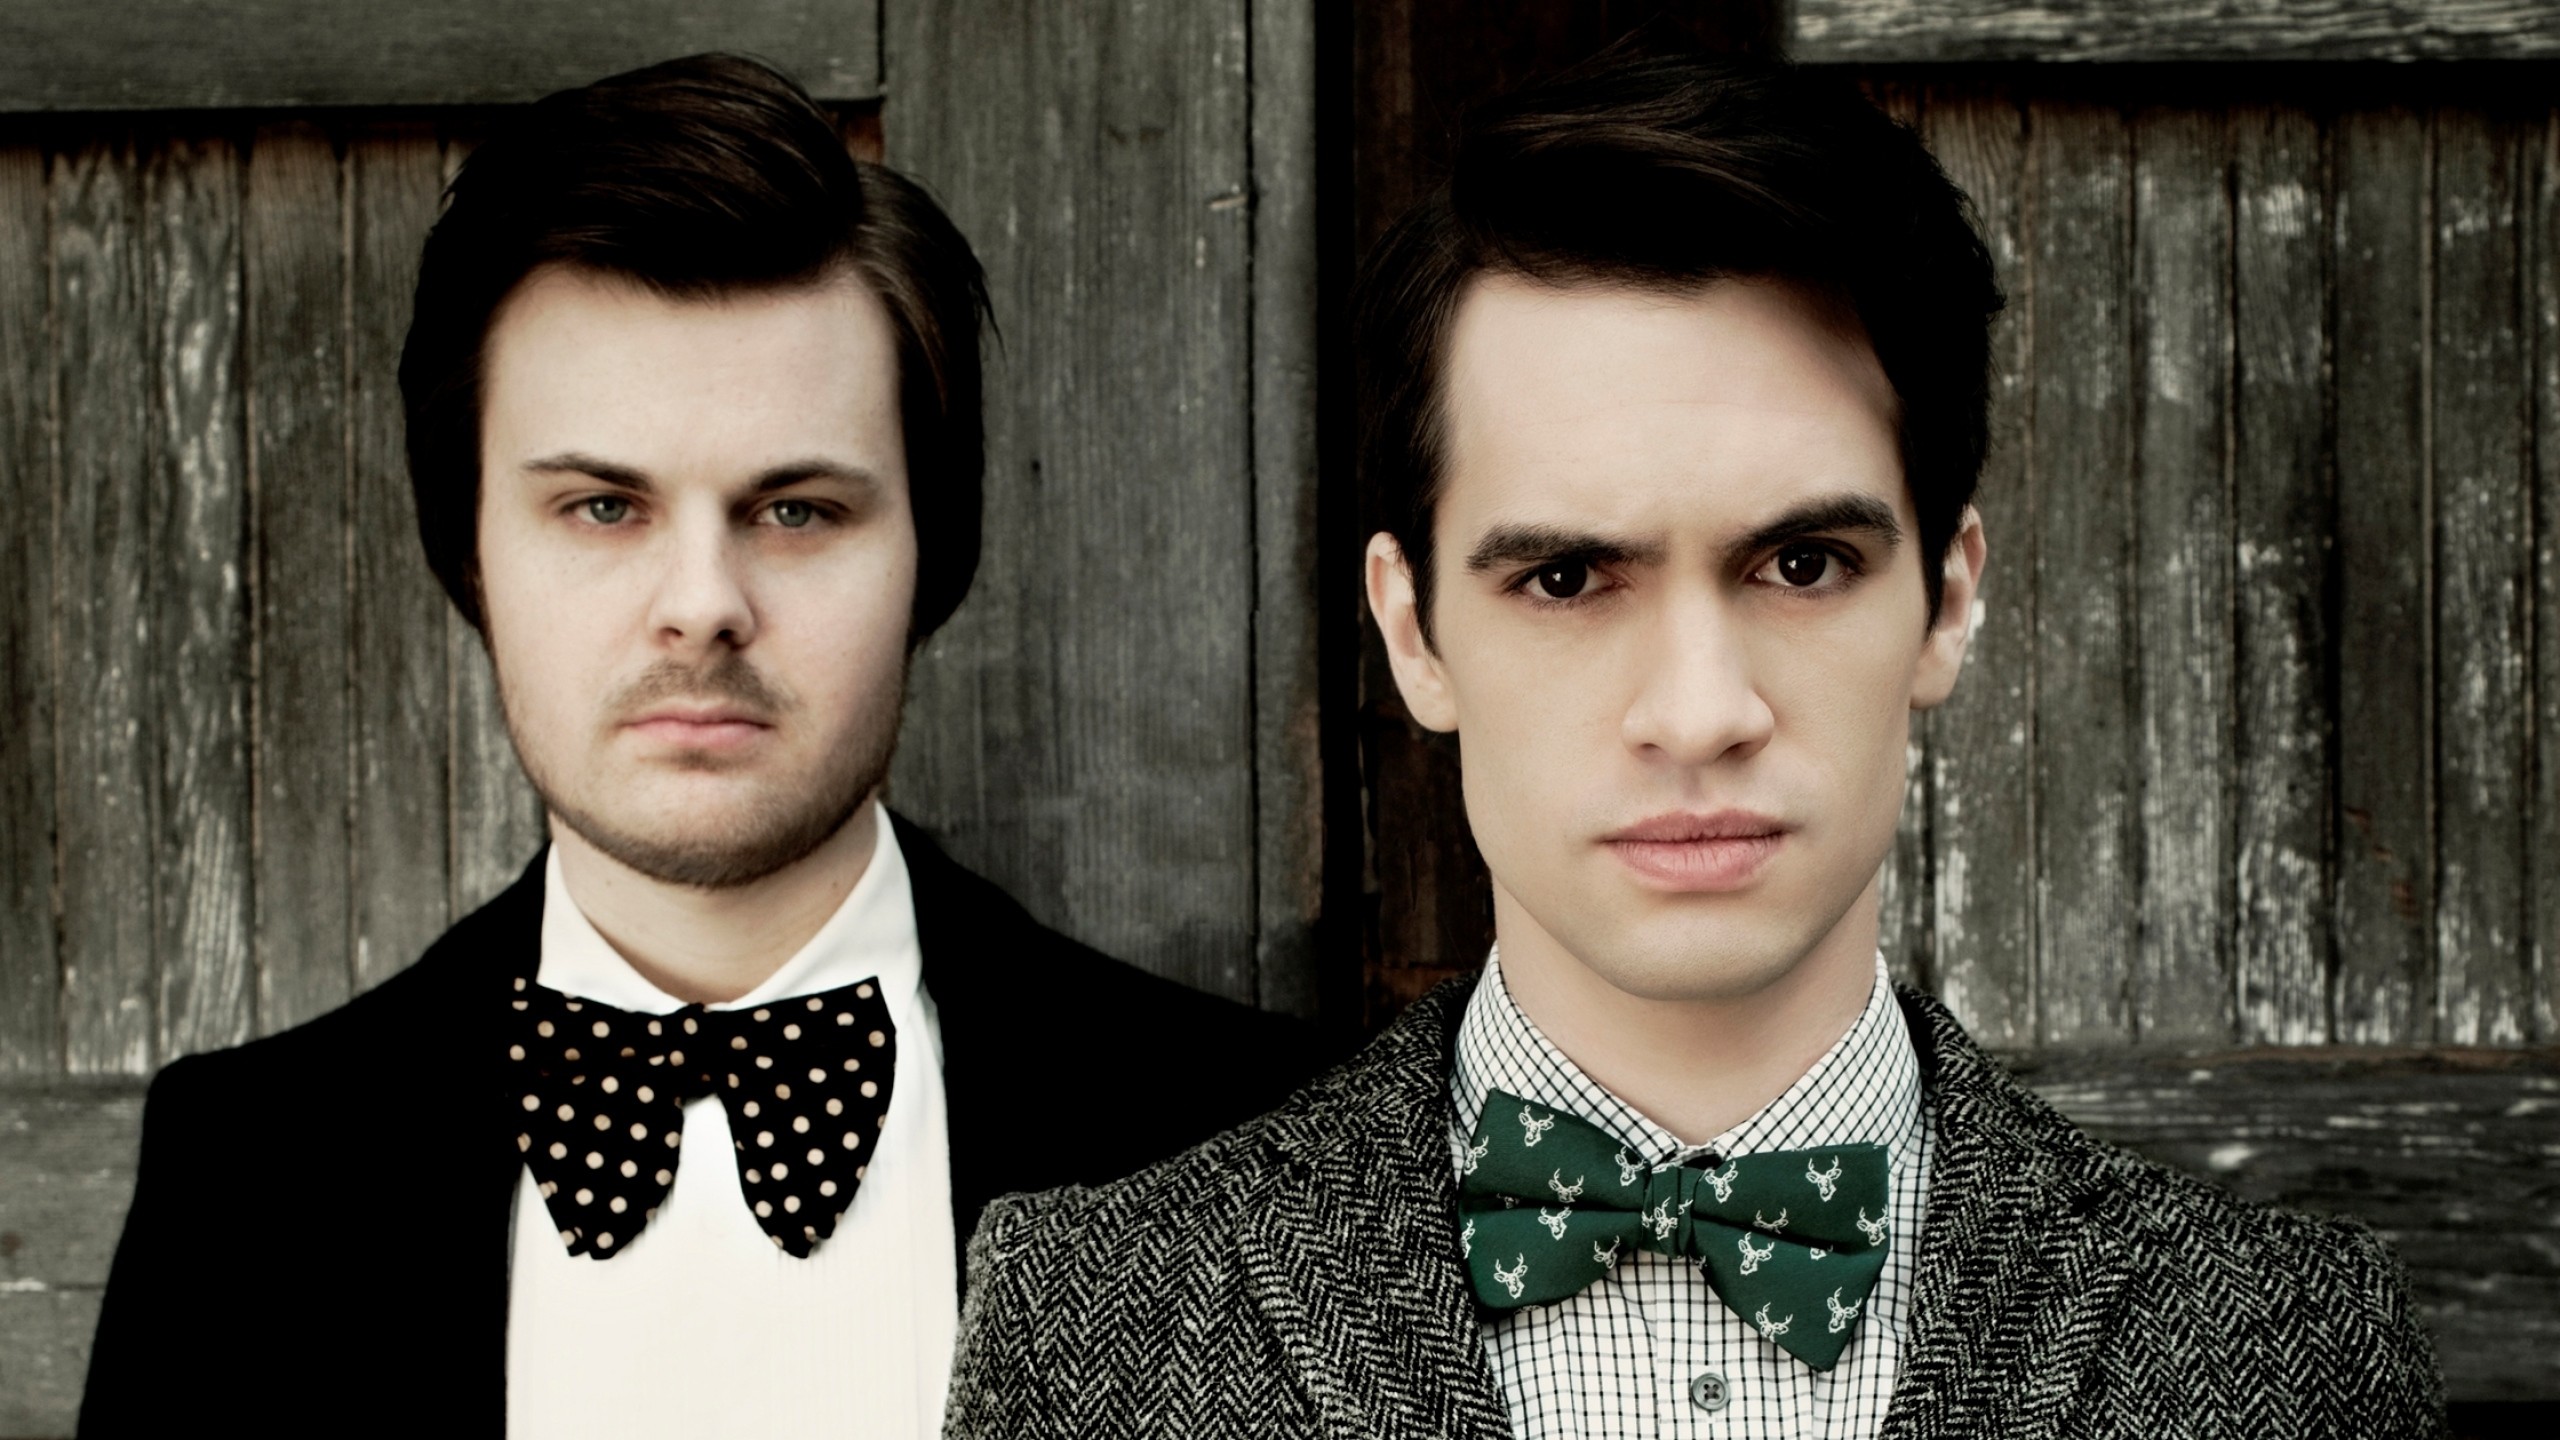 panic at the disco discography torrent download